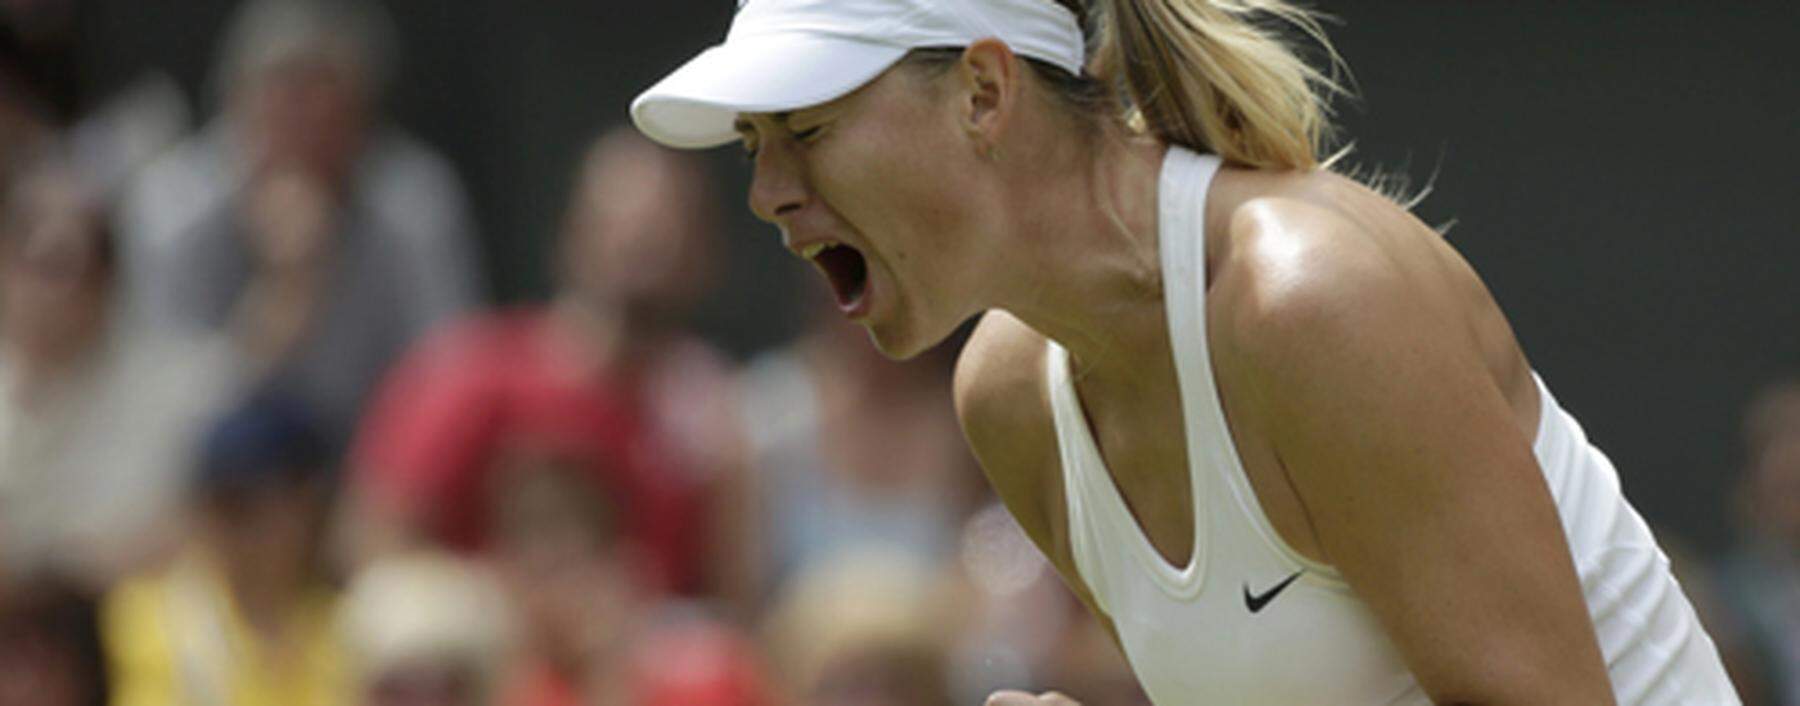 Maria Sharapova of Russia reacts during her women´s singles tennis match against Angelique Kerber of Germany at the Wimbledon Tennis Championships, in London